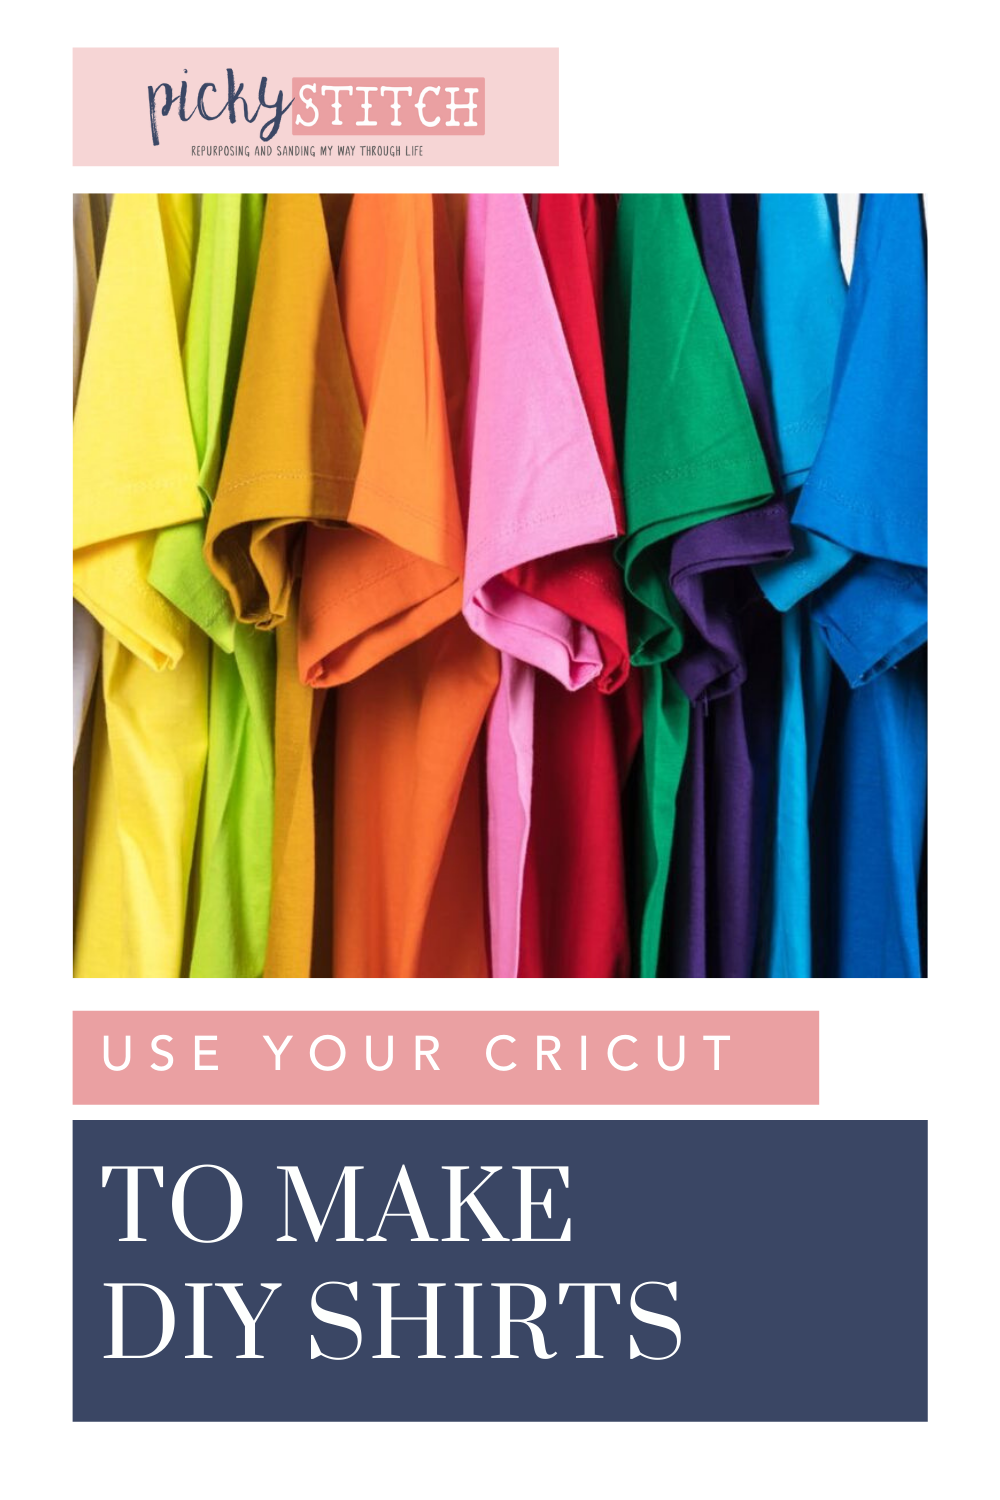 Mylistoflists.com has a little bit of everything. Read through tips that will make your life easier and more creative! Whether for your business or personal use, learn how you can make shirts using a Cricut cutting machine!